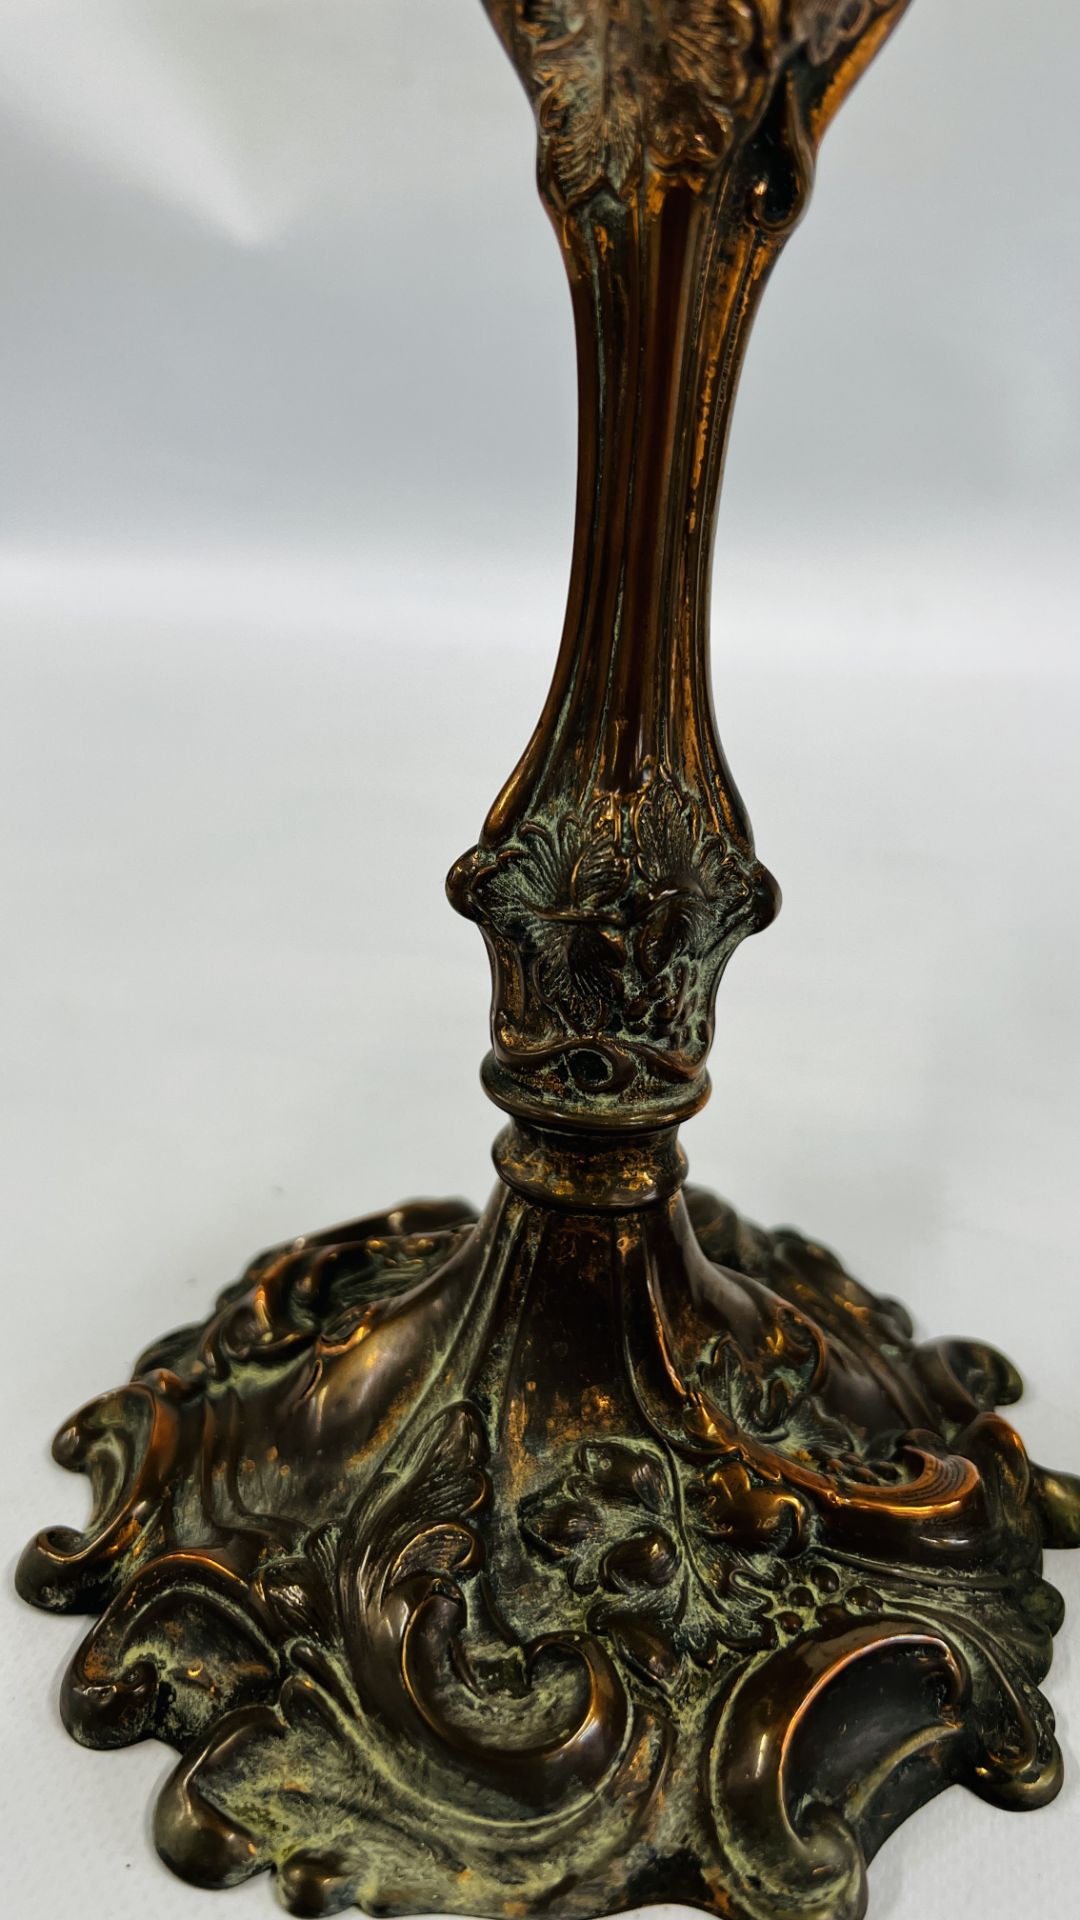 A PAIR OF ORNATE C19TH COPPER CANDLESTICKS WITH DETACHABLE SCONCES - HEIGHT 27CM. - Image 9 of 20